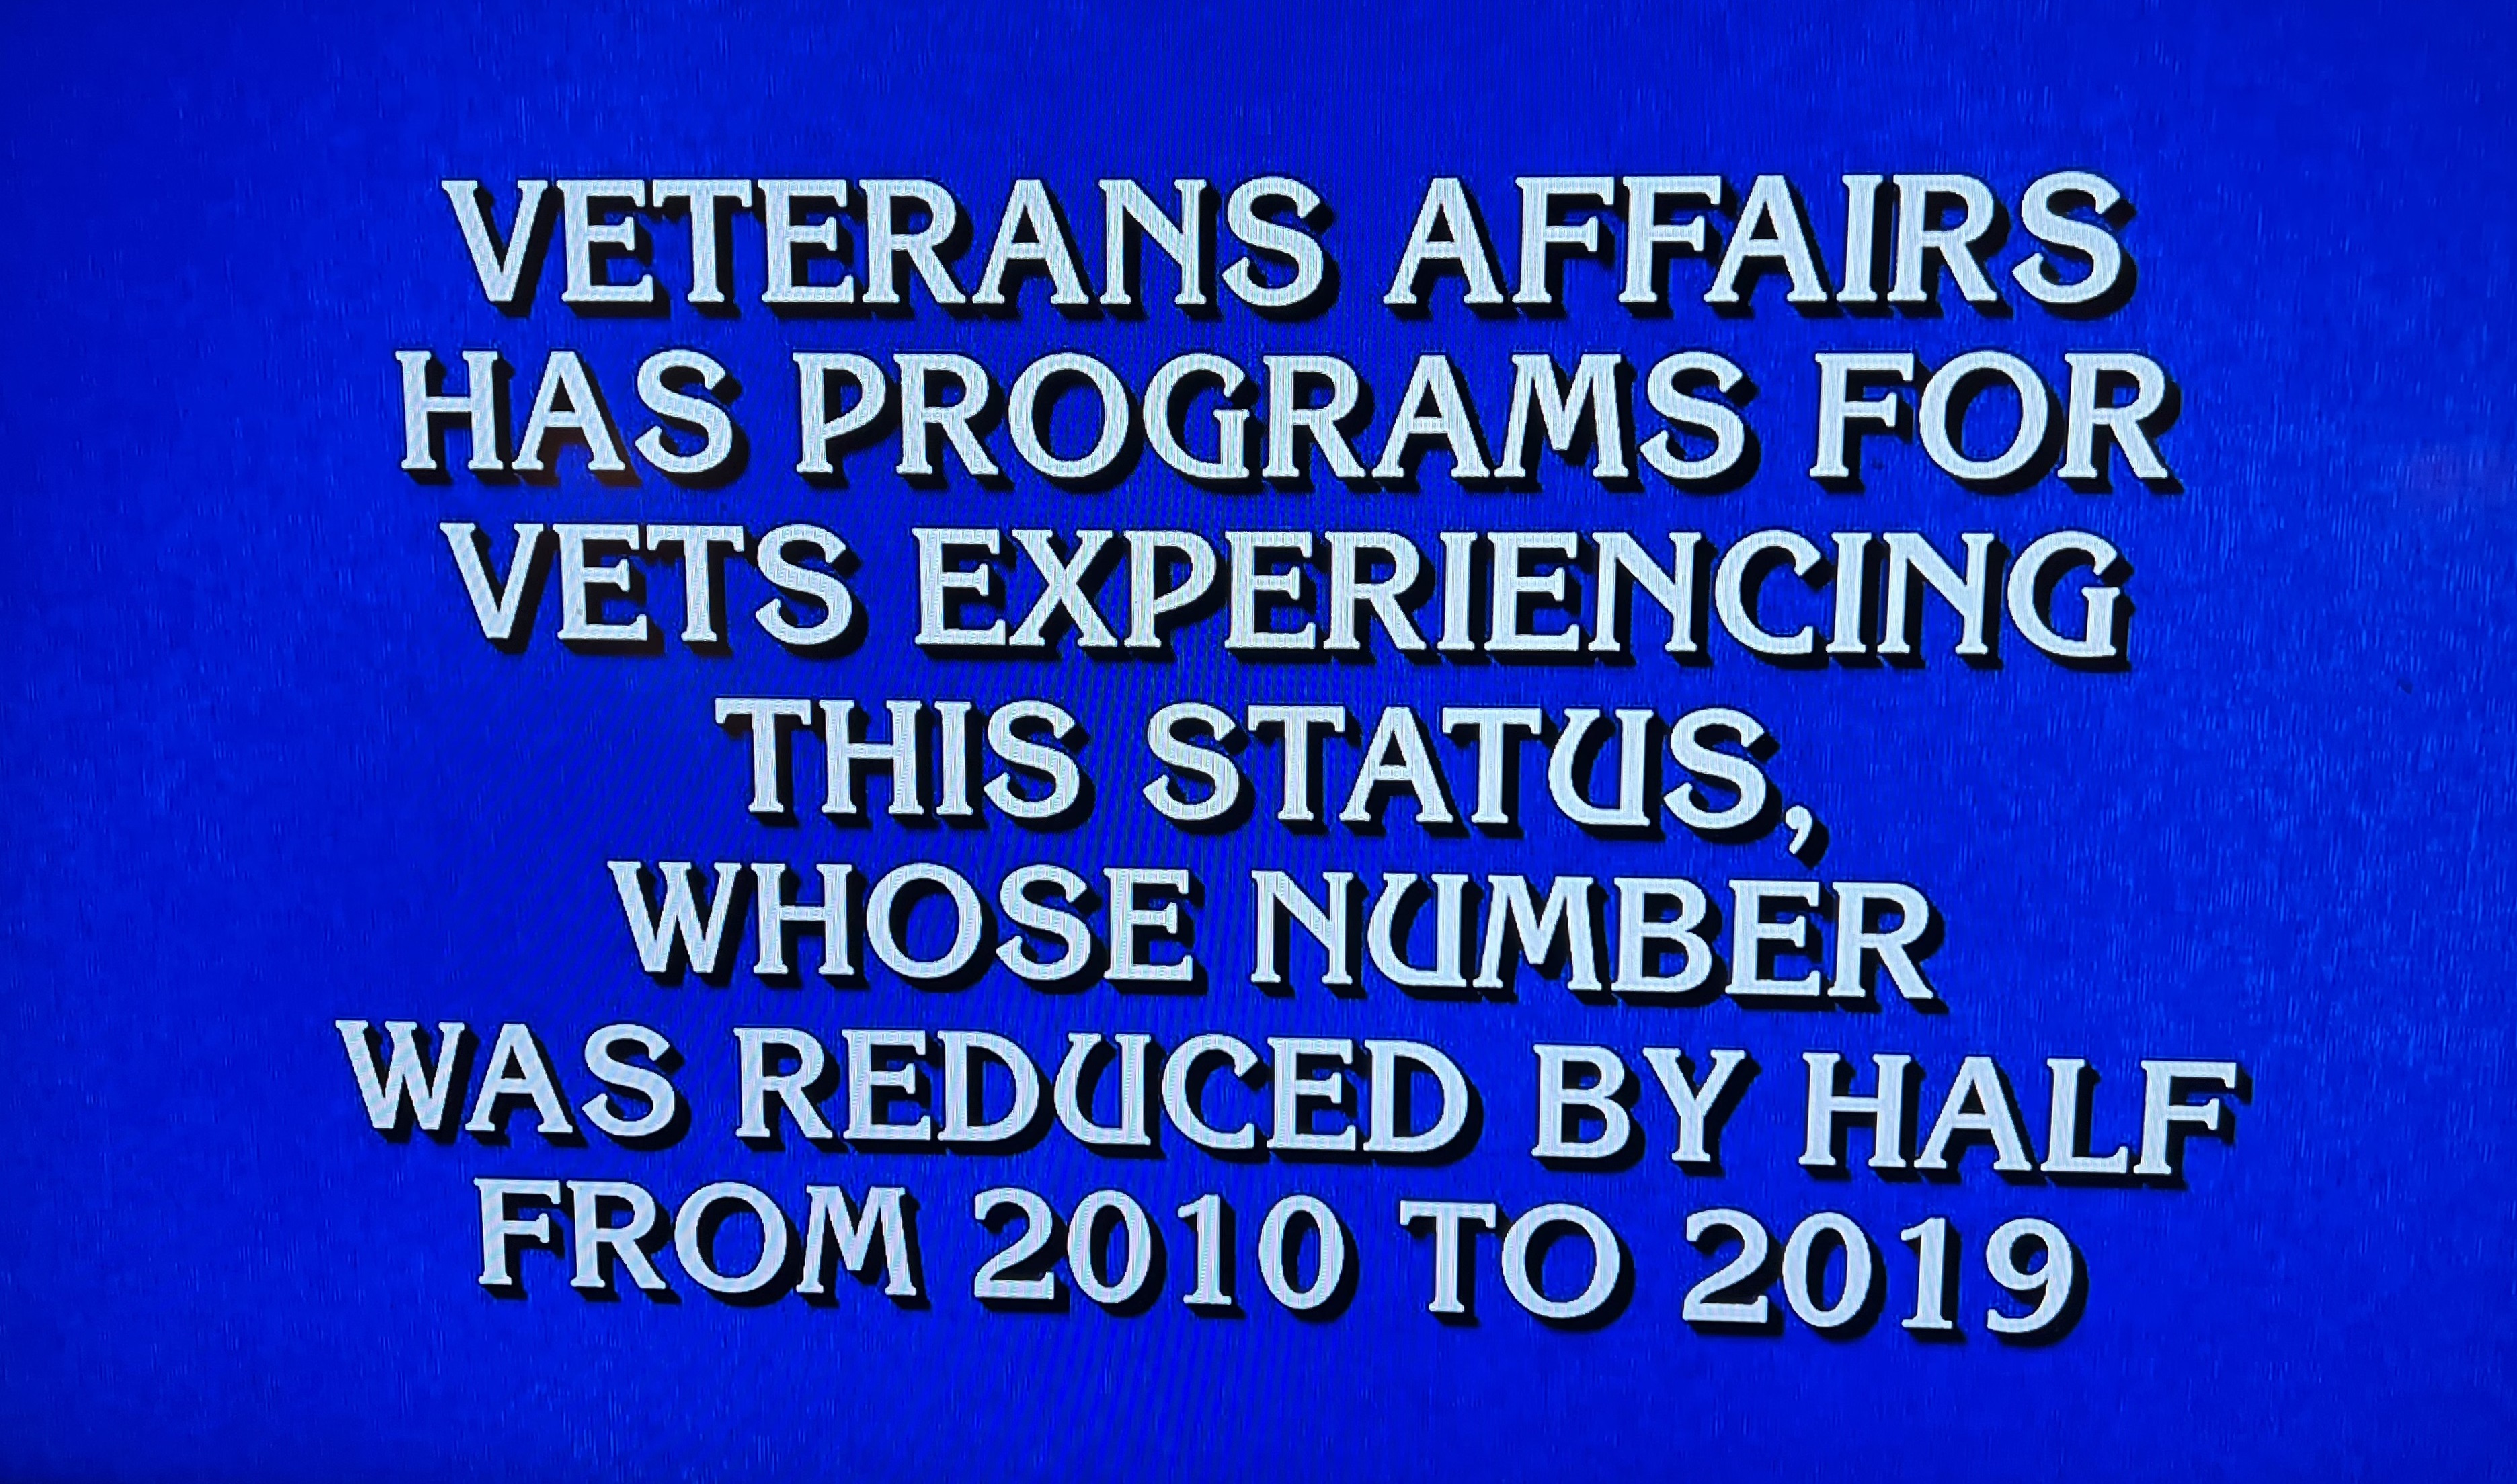 VETERANS AFFAIRS HAS PROGRAMS FOR VETS EXPERIENCING THIS STATUS, WHOSE NUMBER WAS REDUCED BY HALF FROM 2010 TO 2019